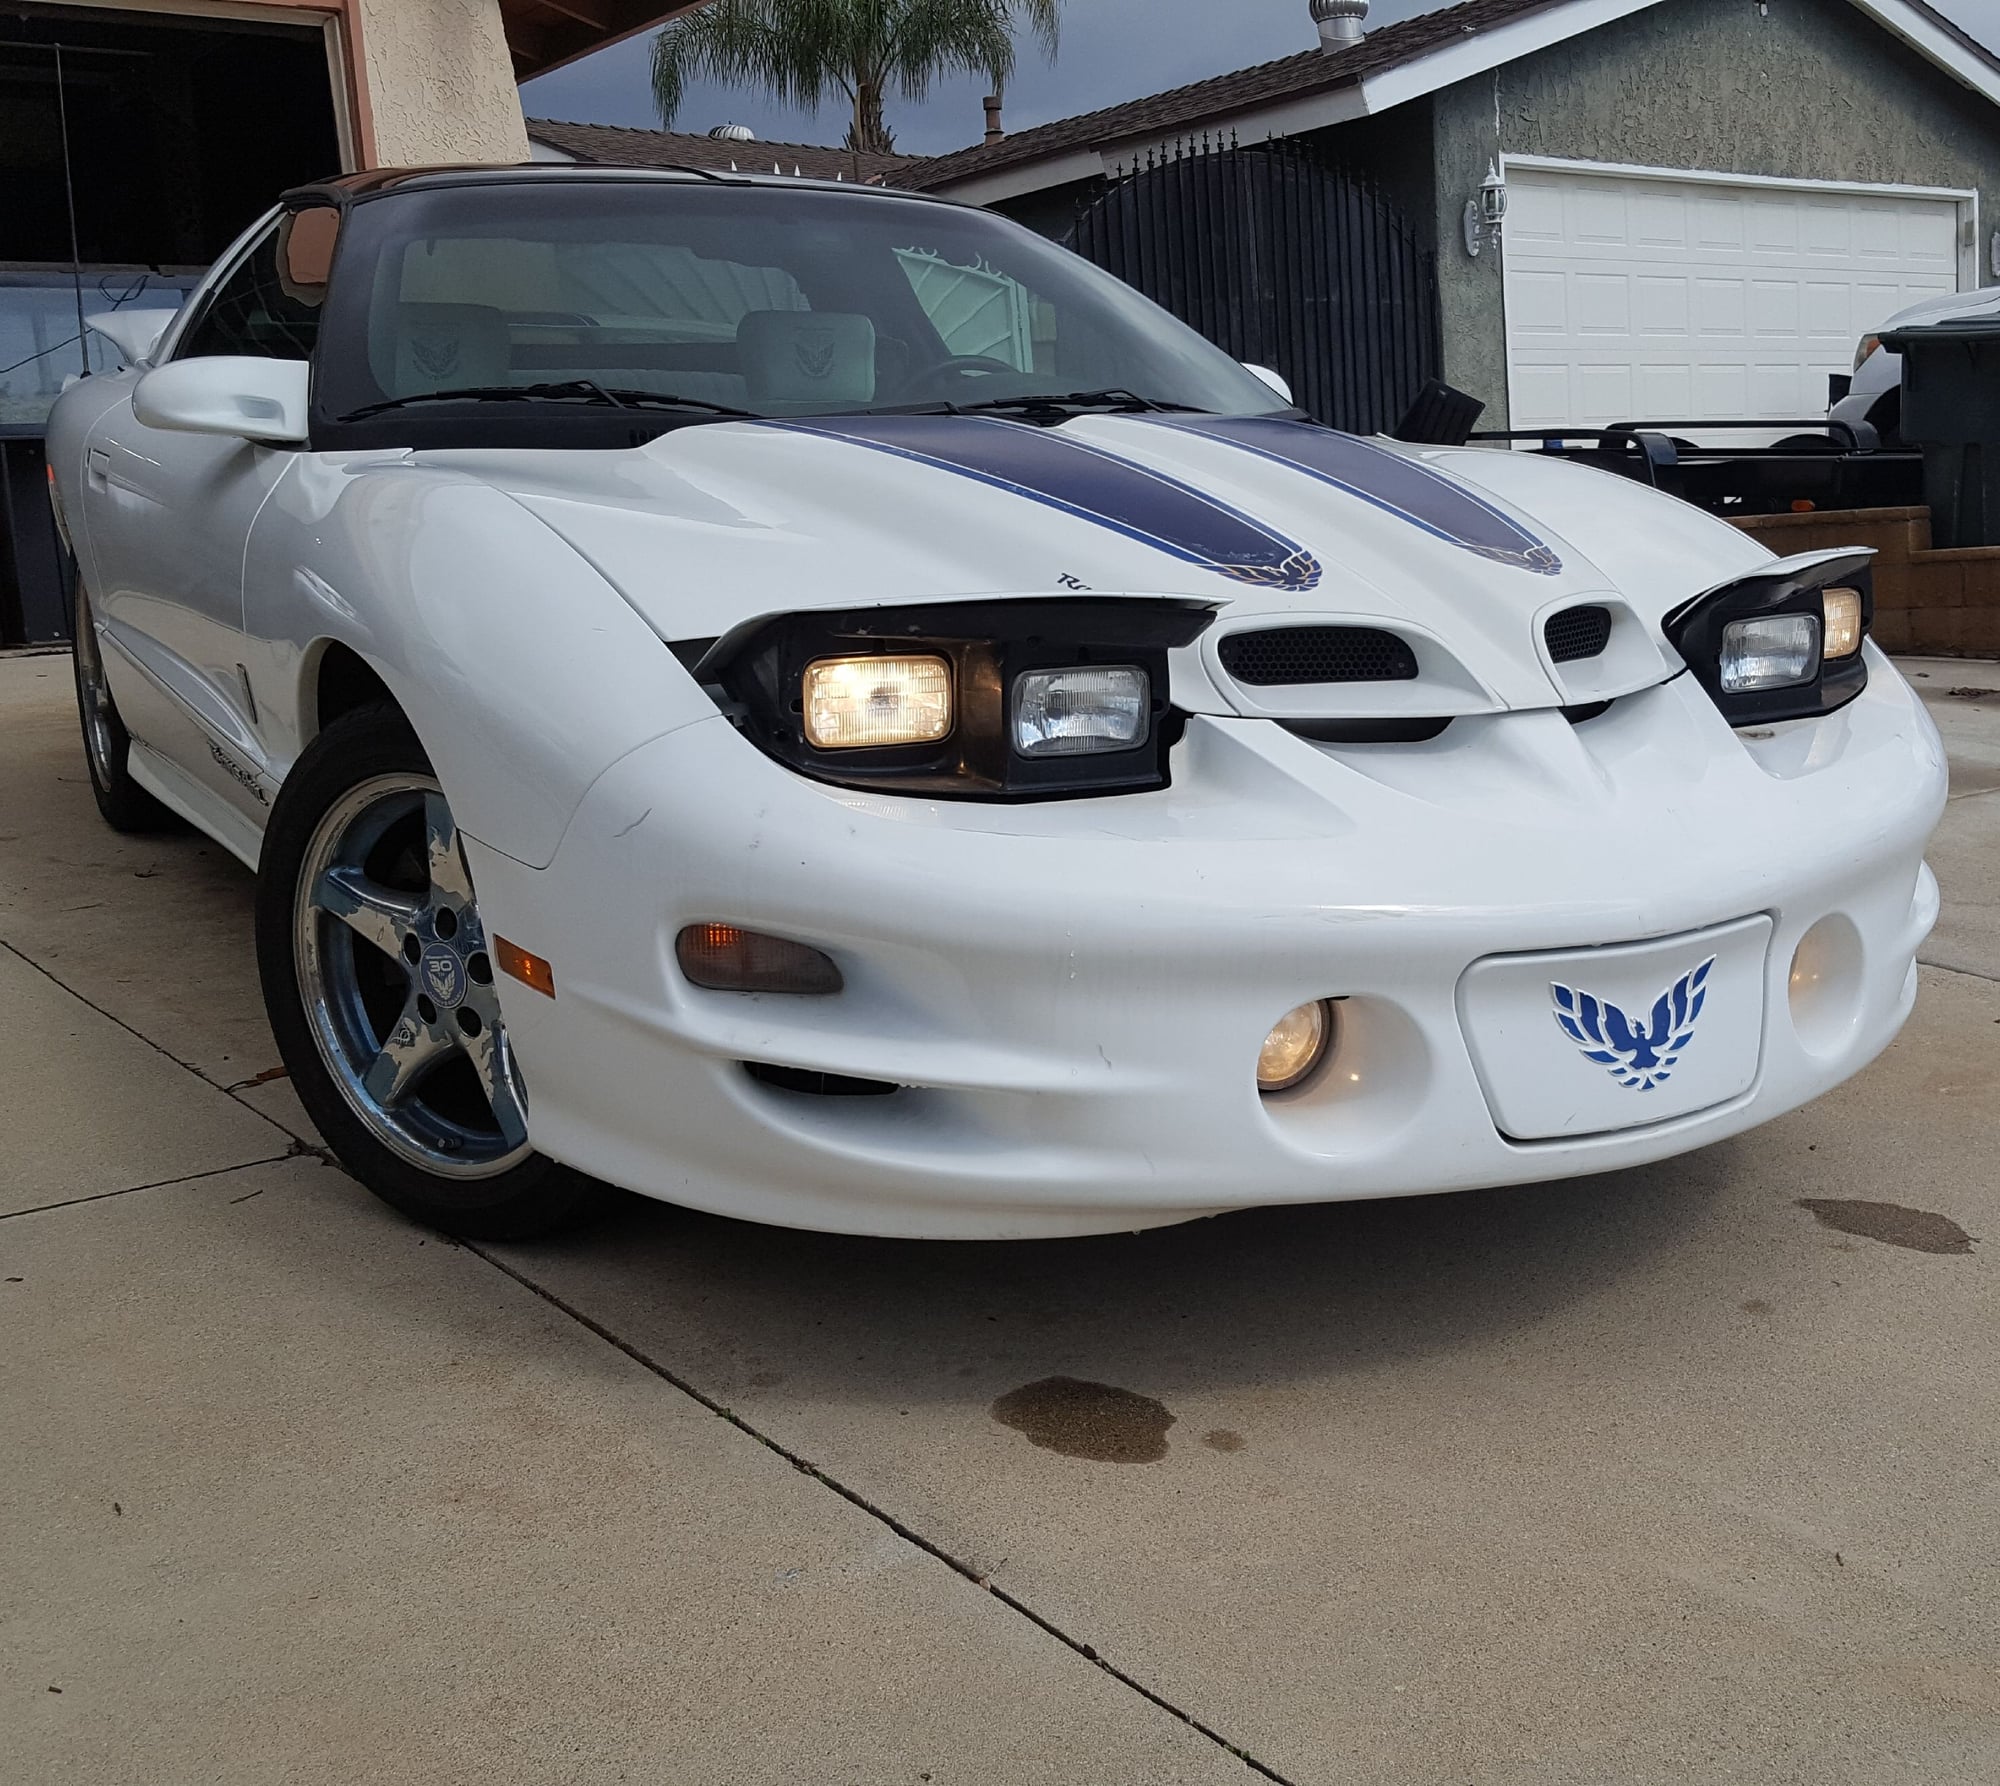 1999 Pontiac Firebird - 1999 30th Anniversary Trans Am WS6 - Used - VIN 2G2FV22G1X2222934 - 122,282 Miles - 8 cyl - 2WD - Manual - Coupe - White - Southern California, CA 917**, United States